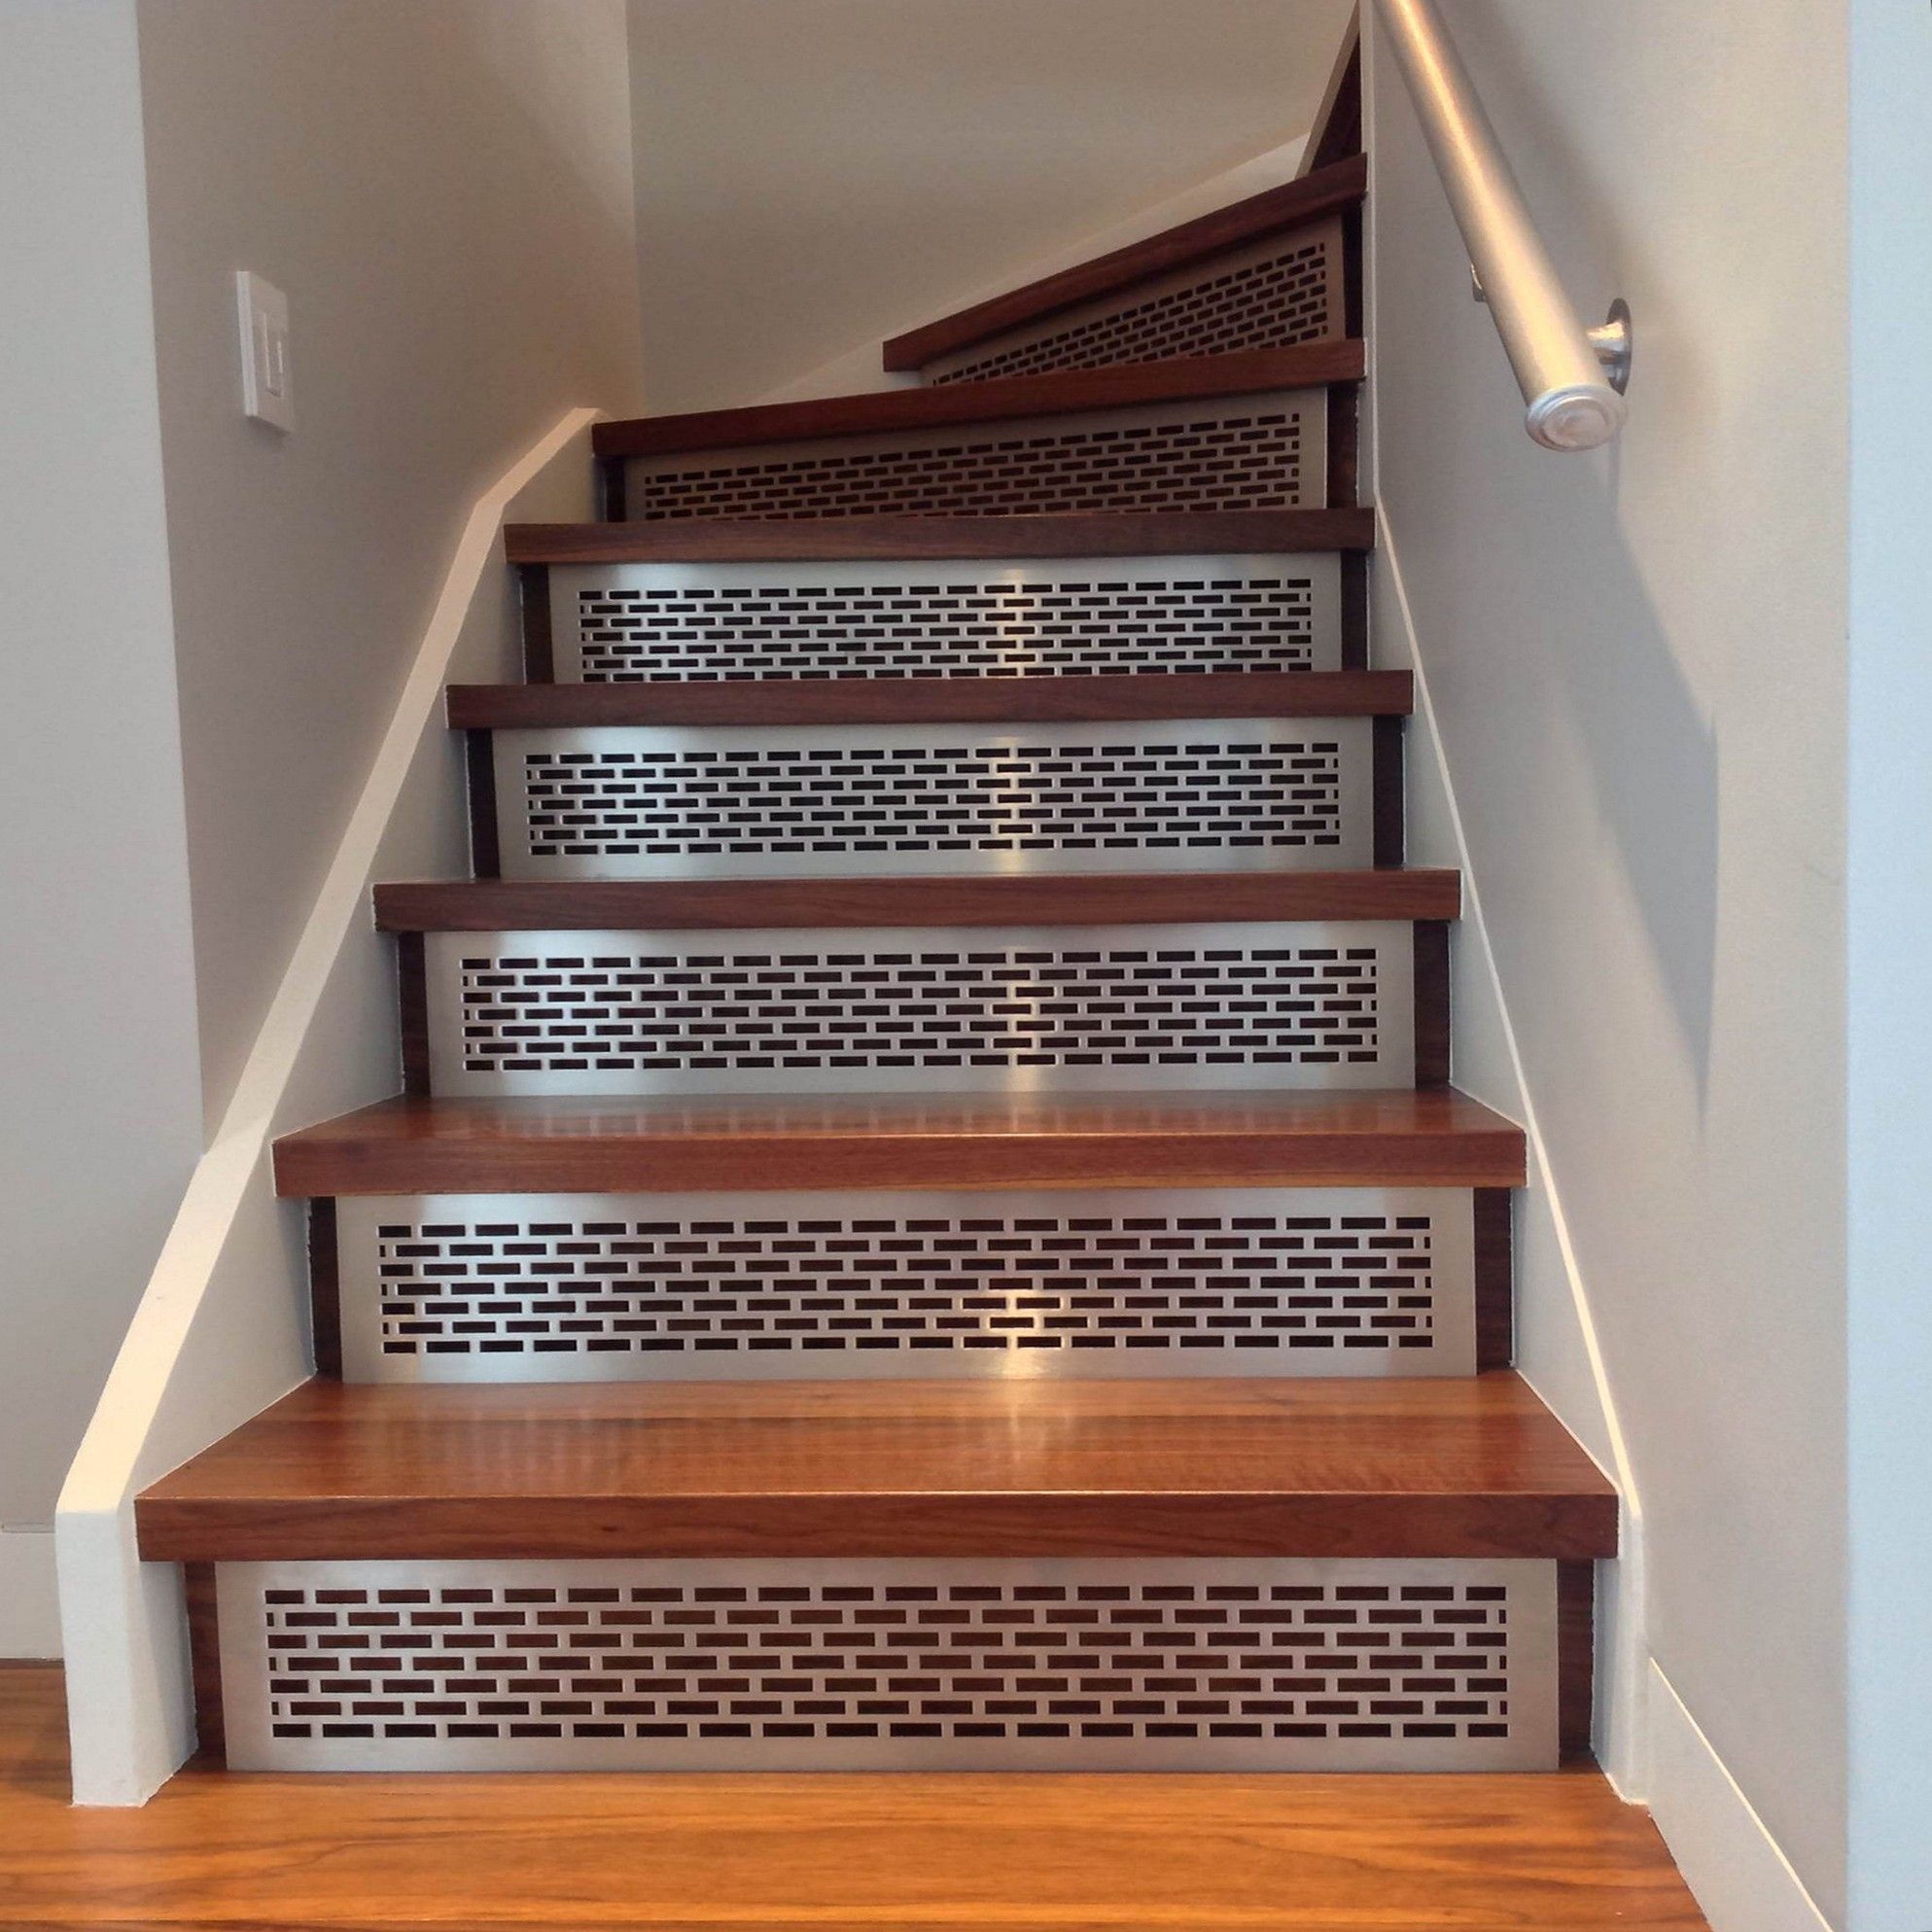 Rug Nice Carpet Stair Treads Lowes For Home Flooring Ideas Intended For Stair Tread Carpet Covers (View 12 of 20)